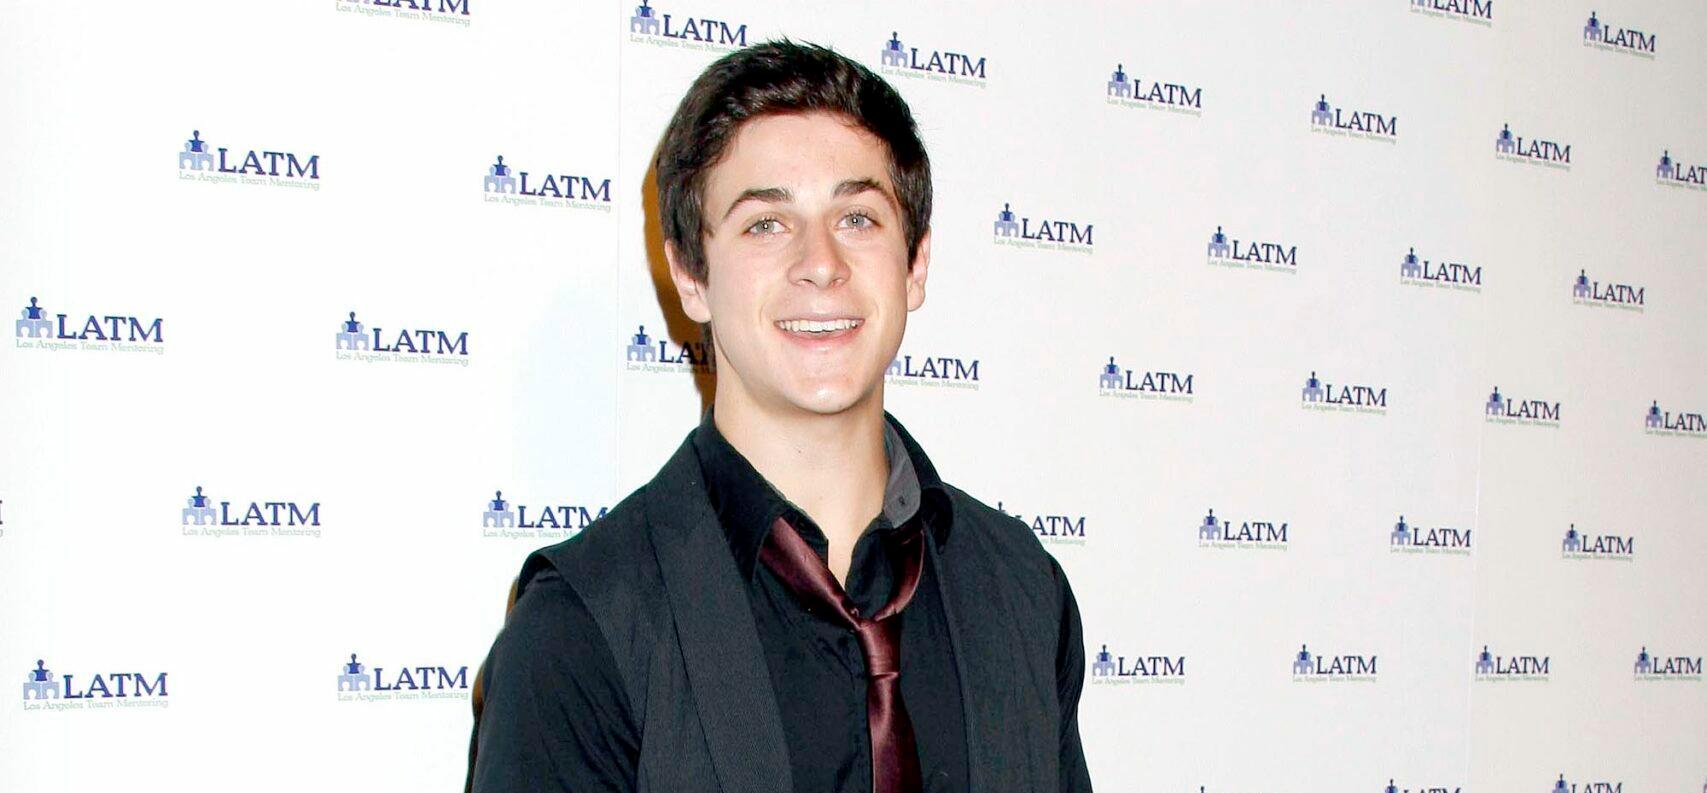 David Henrie of 'Wizards of Waverly Place'Disney Channel stars attend 'A Summer Soiree -The Magic of Mentoring' held at the Beverly Wilshire HotelLos Angeles, California - 24.07.09Credit: (Mandatory) Adriana M. Barraza / WENN.com Newscom/(Mega Agency TagID: wennphotostwo231656.jpg) [Photo via Mega Agency]